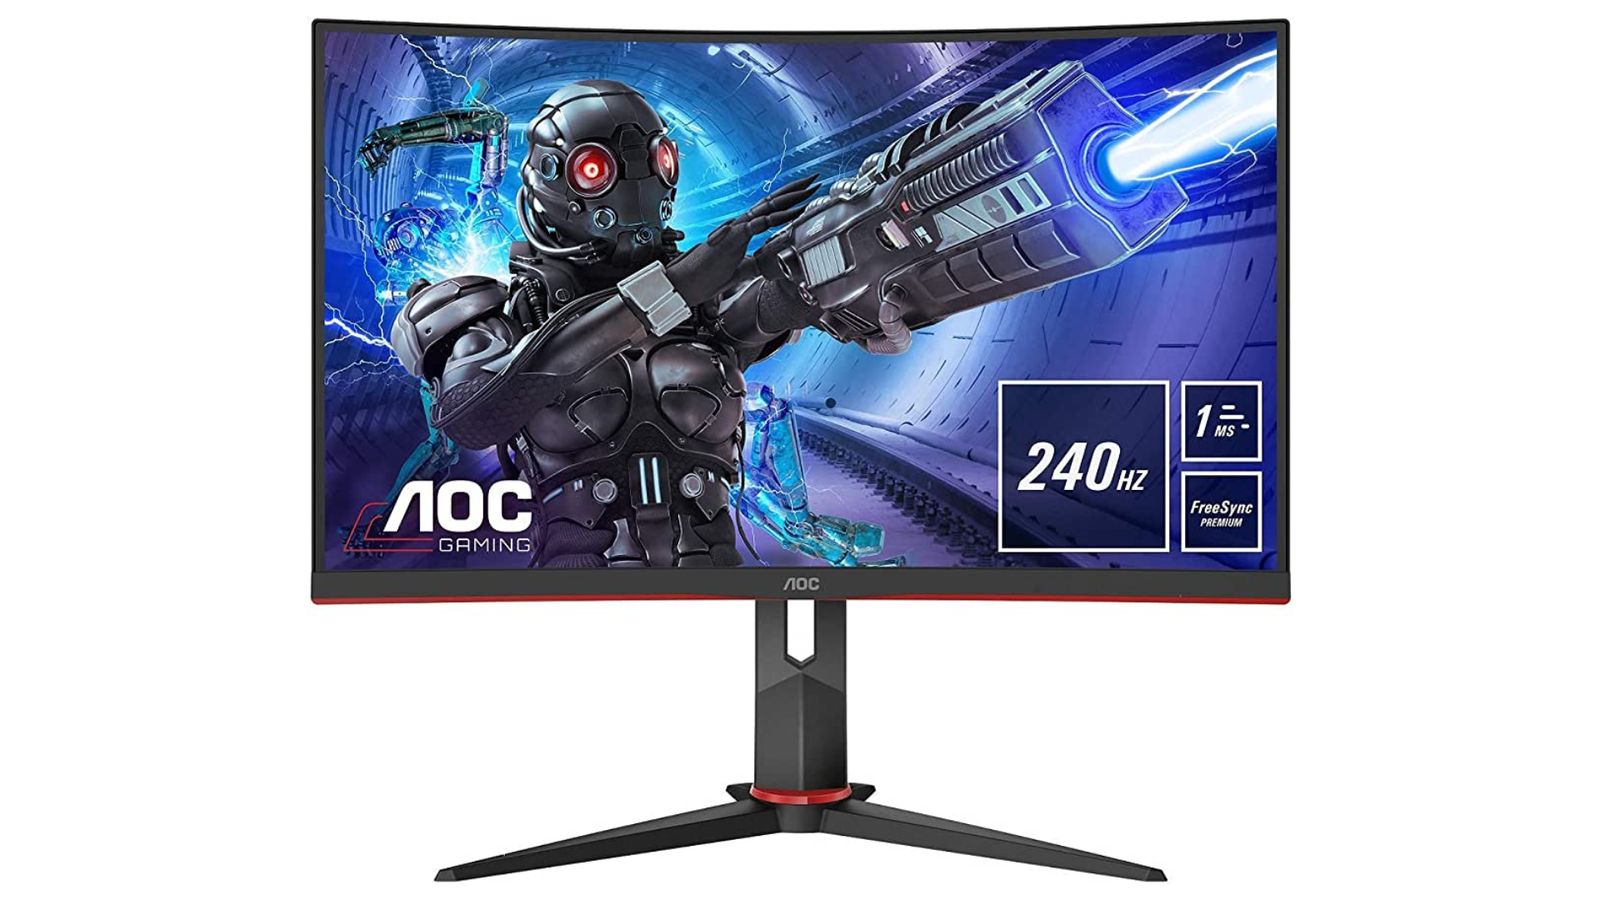 AOC Gaming C32G2ZE product image of a dark grey monitor with a robot firing a gun on the display.